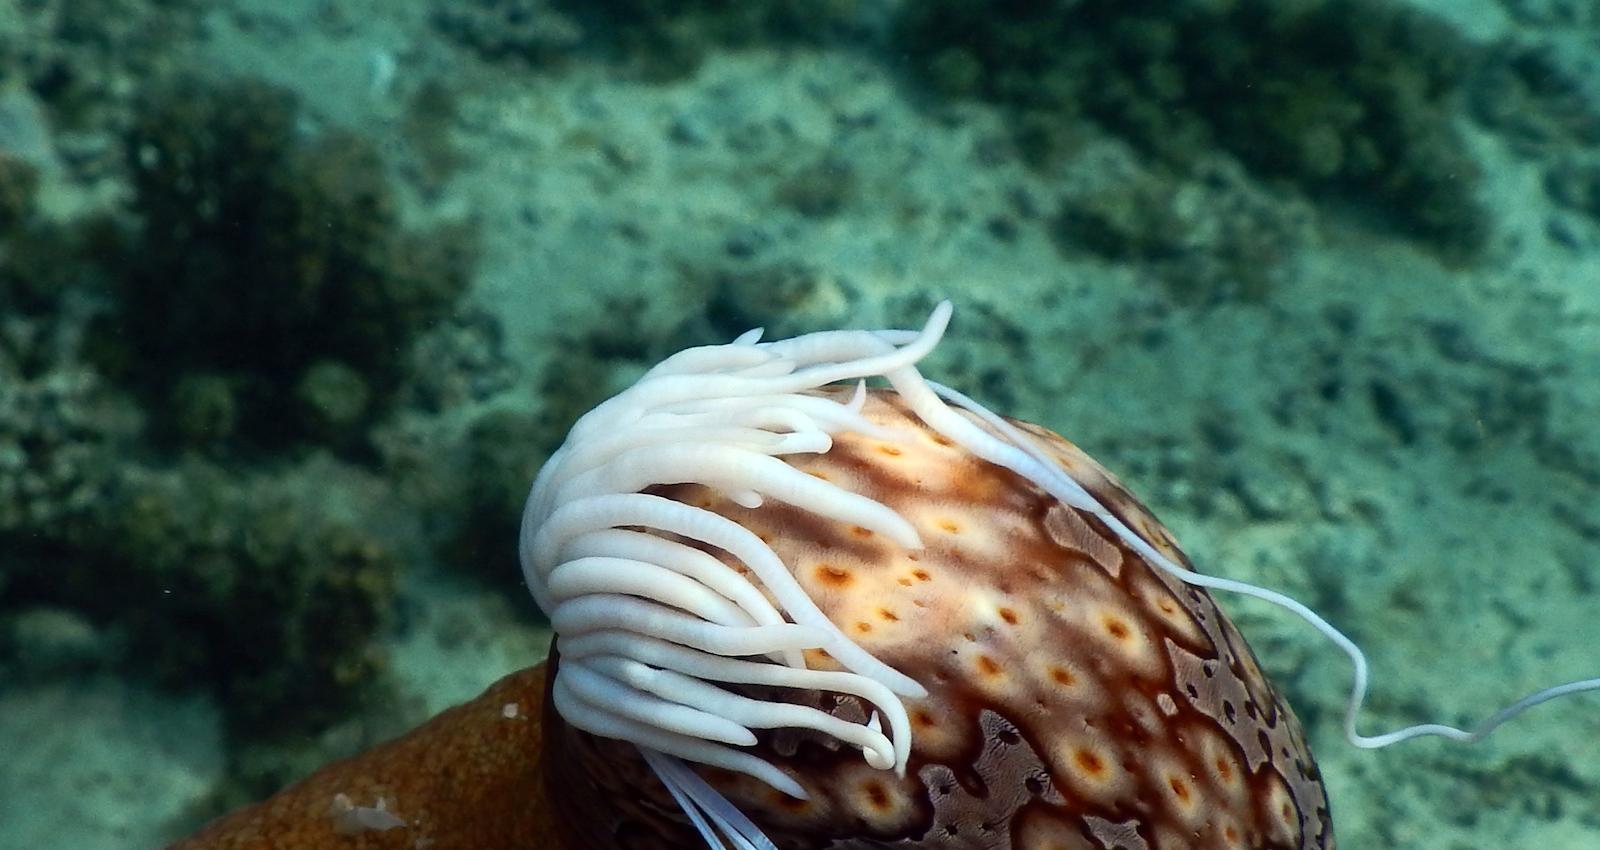 sea cucumber with sticky defense threads